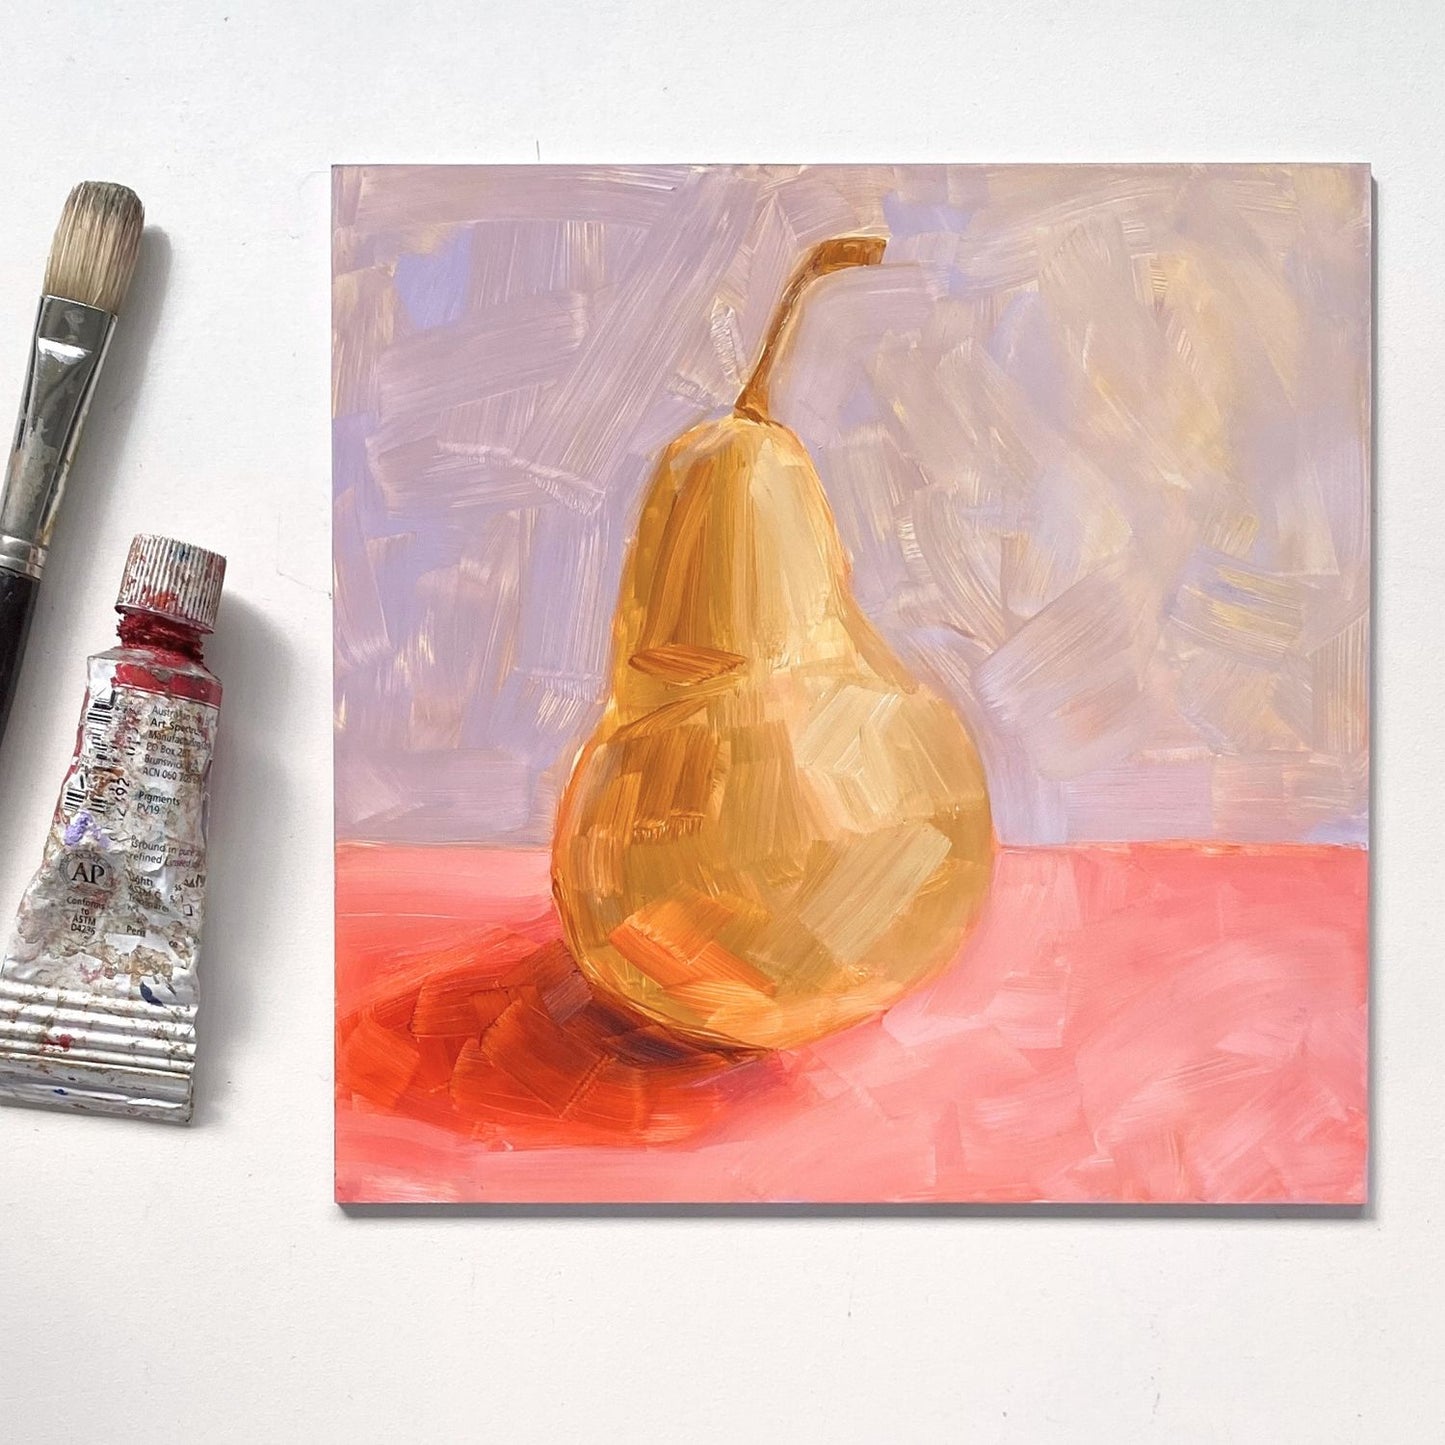 lifestyle image of an original oil painting of a yellow / beige pear on a textured pink surface and lilac background. the painting is on a white desk and there is a paintbrush and oil paint tube next to it